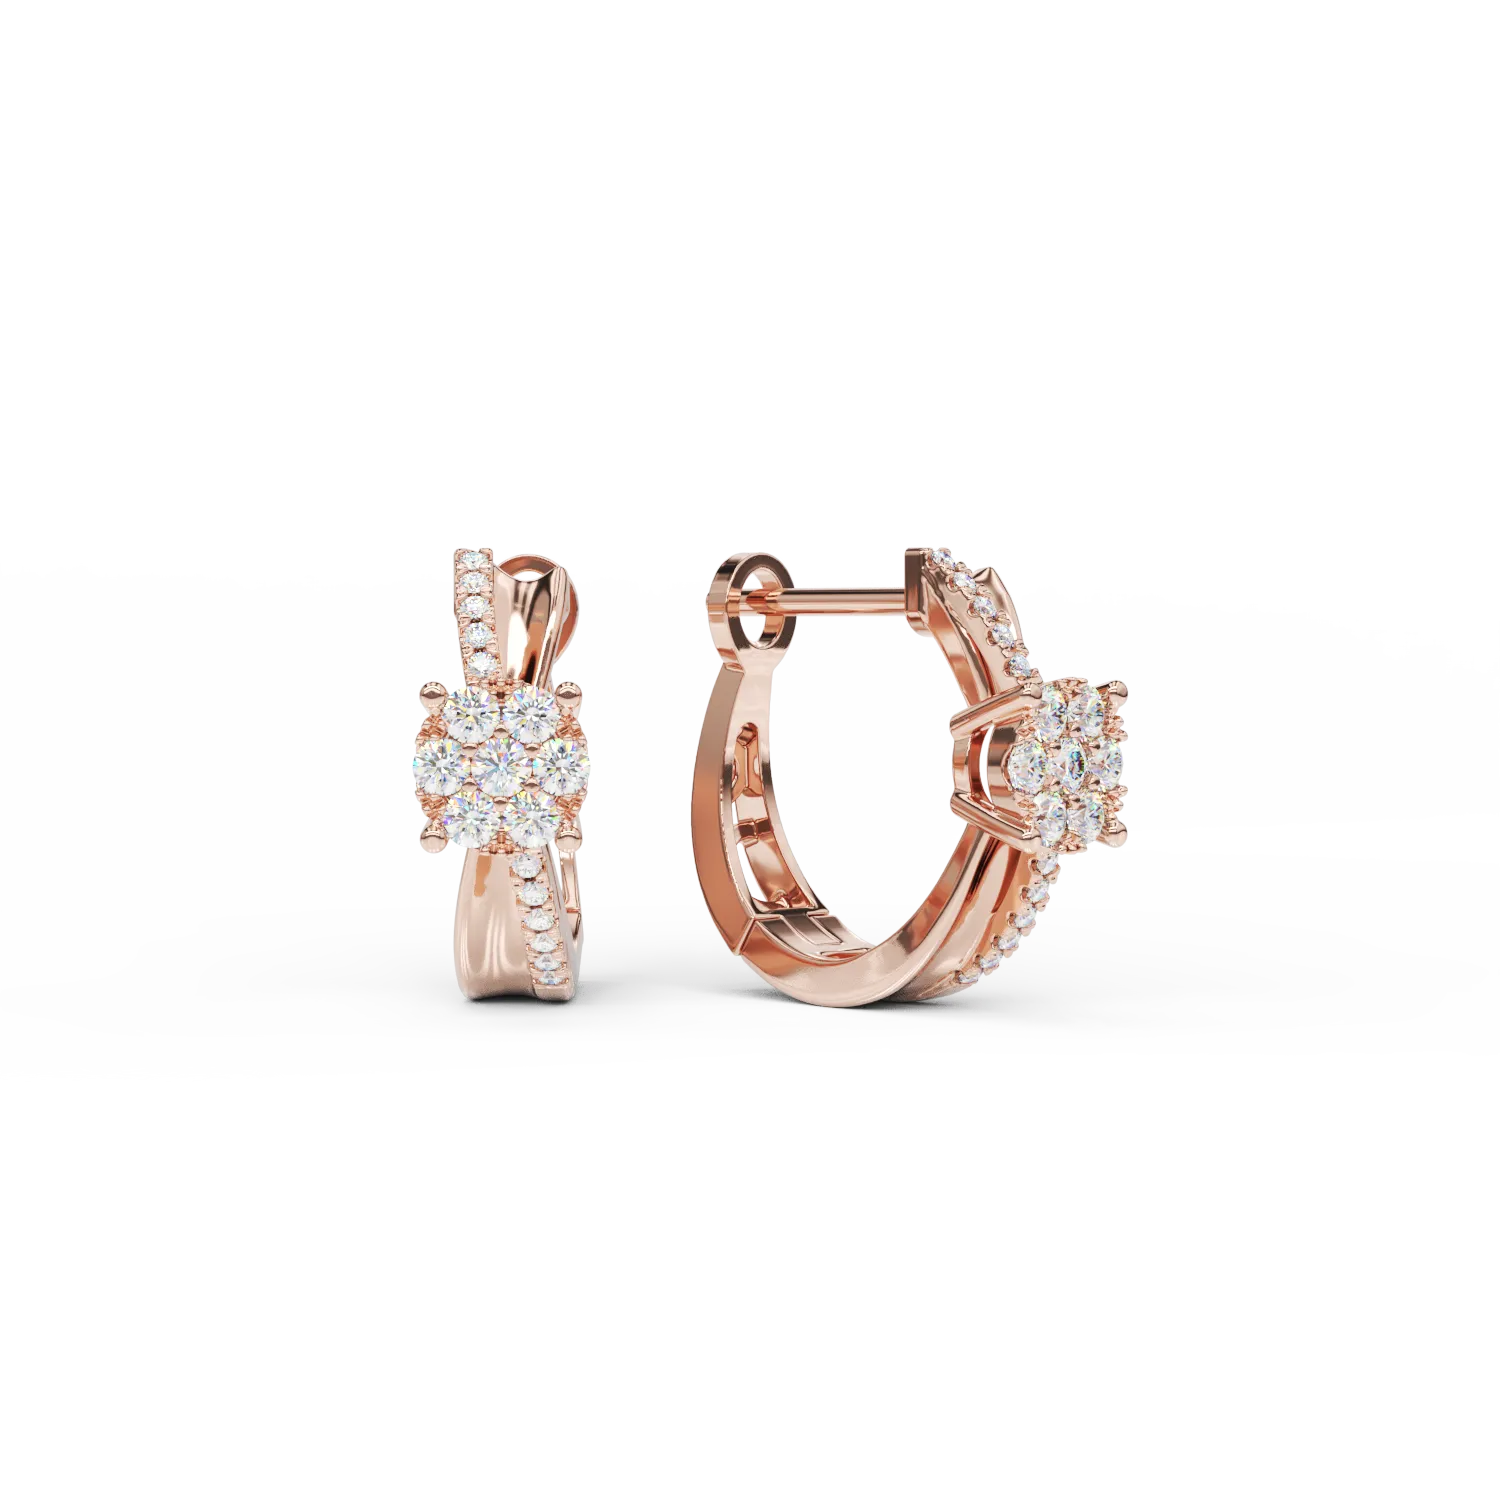 18K rose gold earrings with 0.31ct diamonds